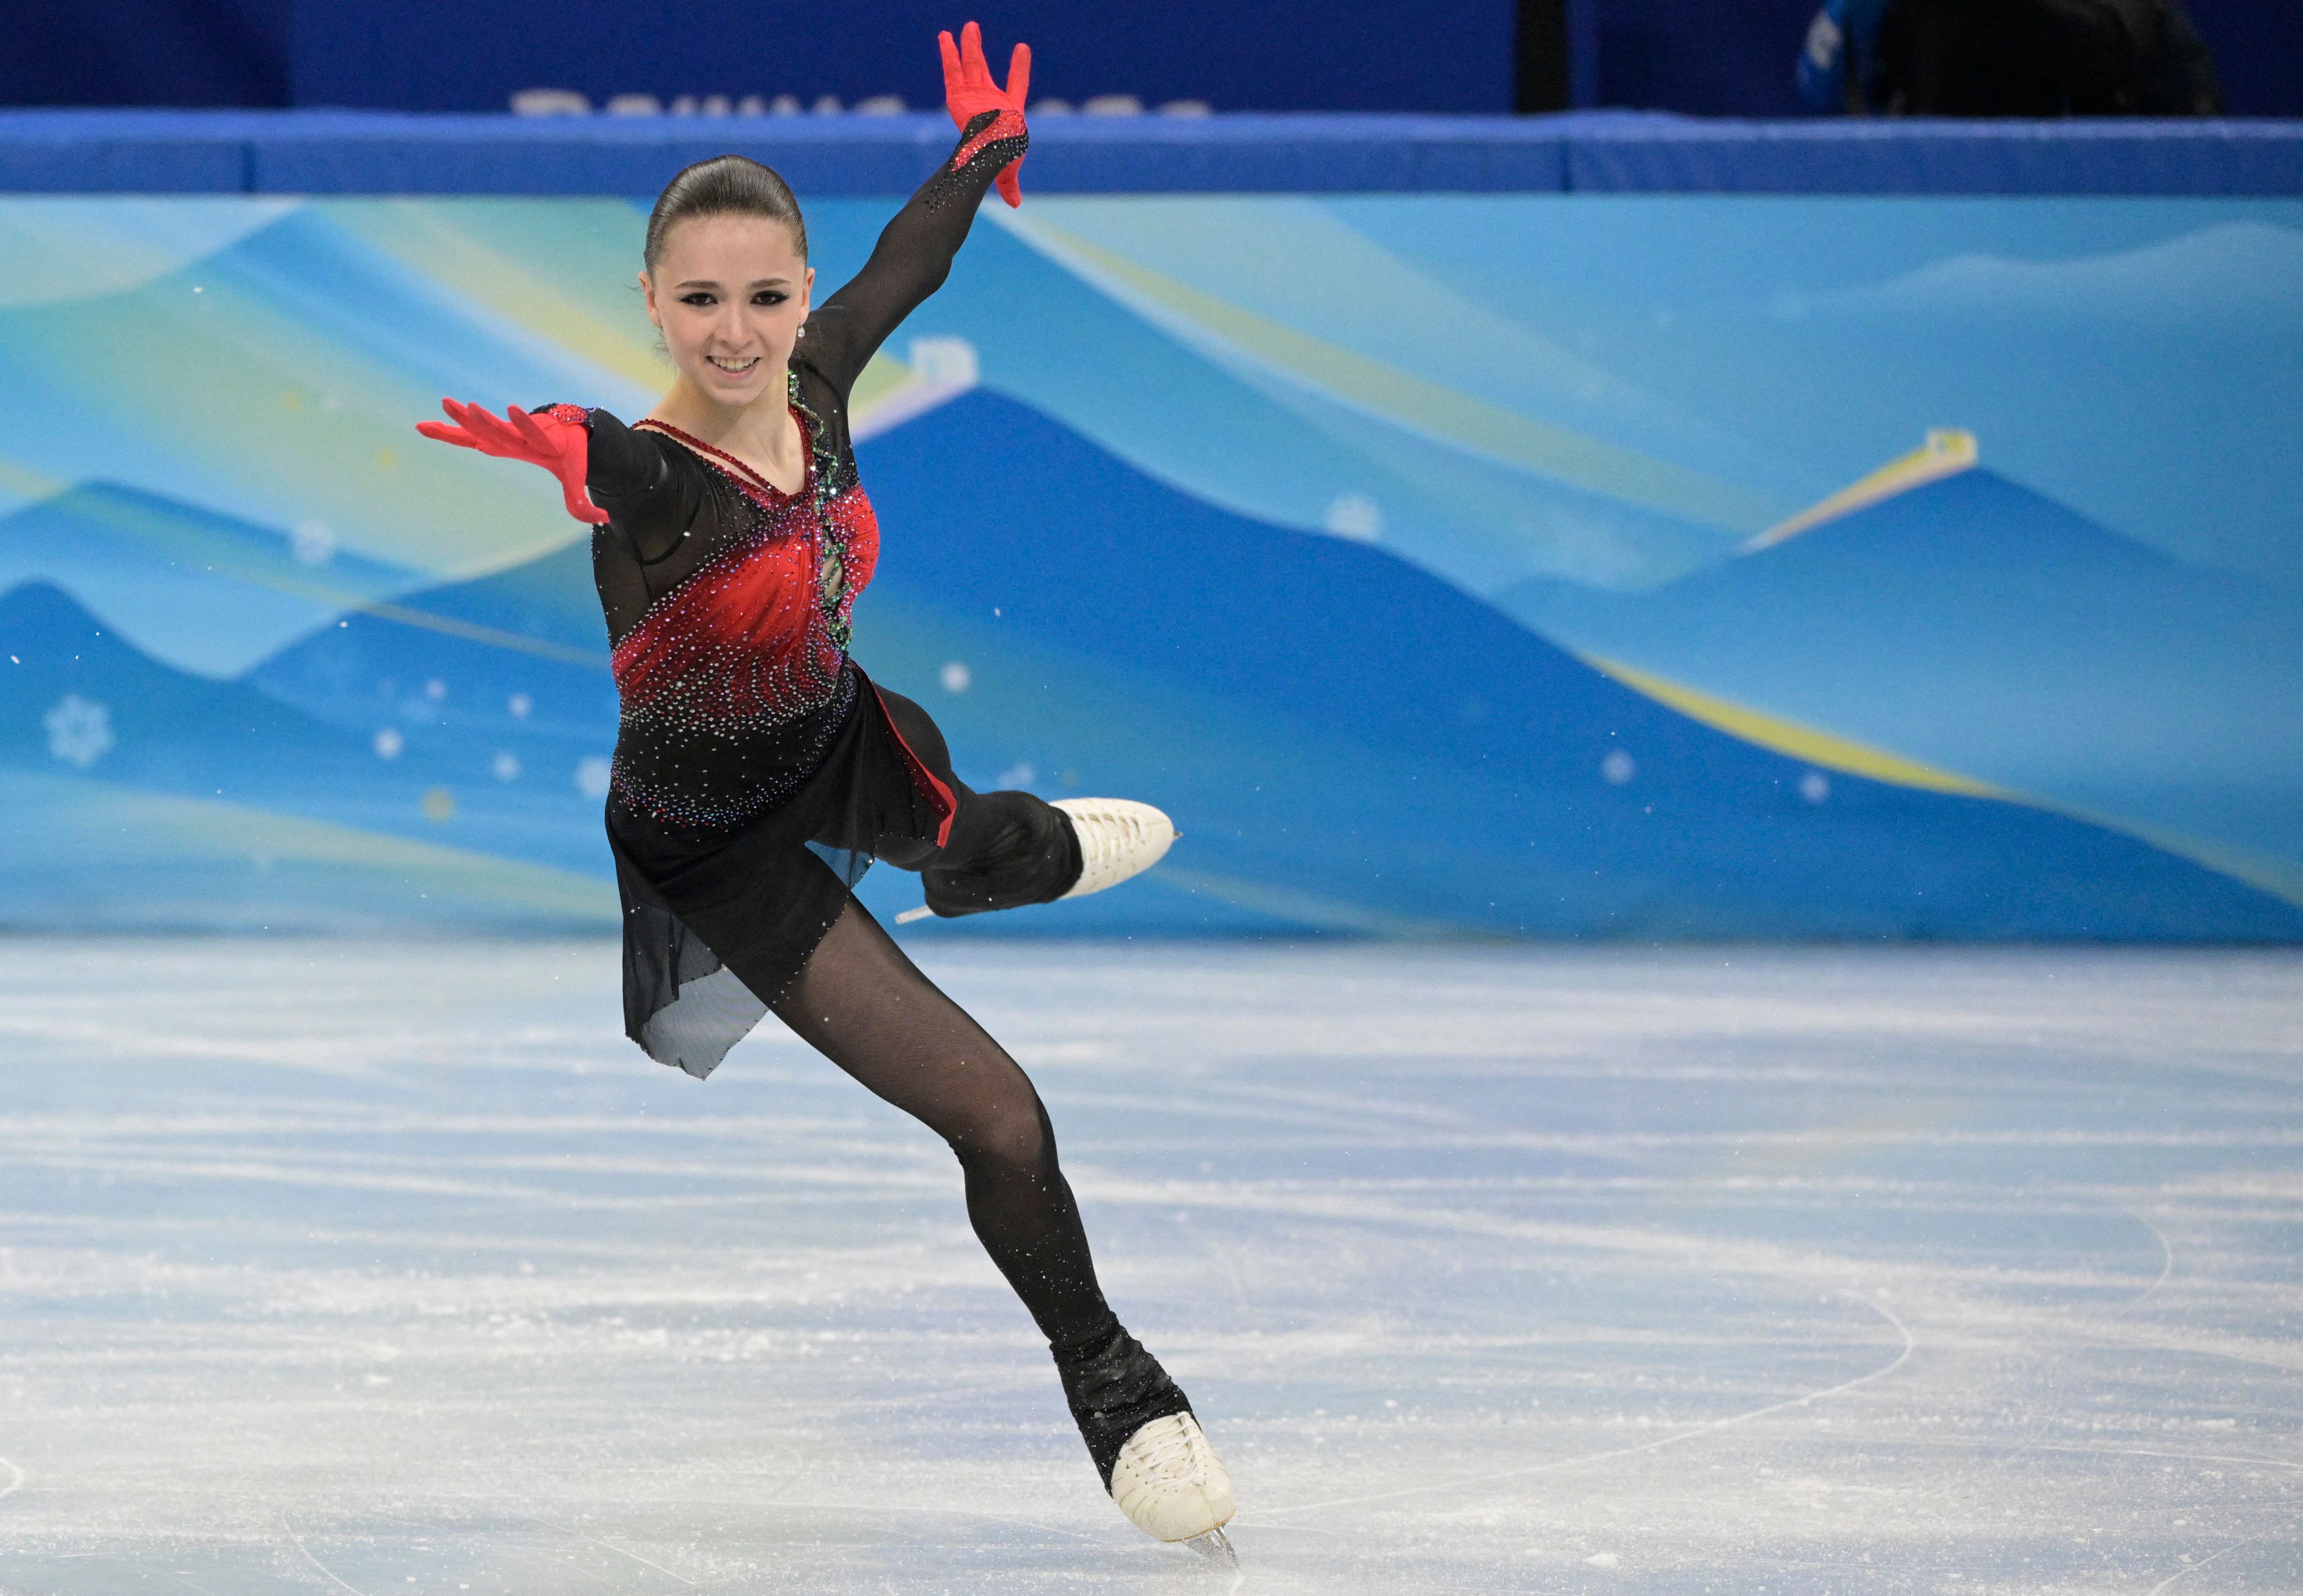 What to Know About Olympics Figure Skater Kamila Valieva